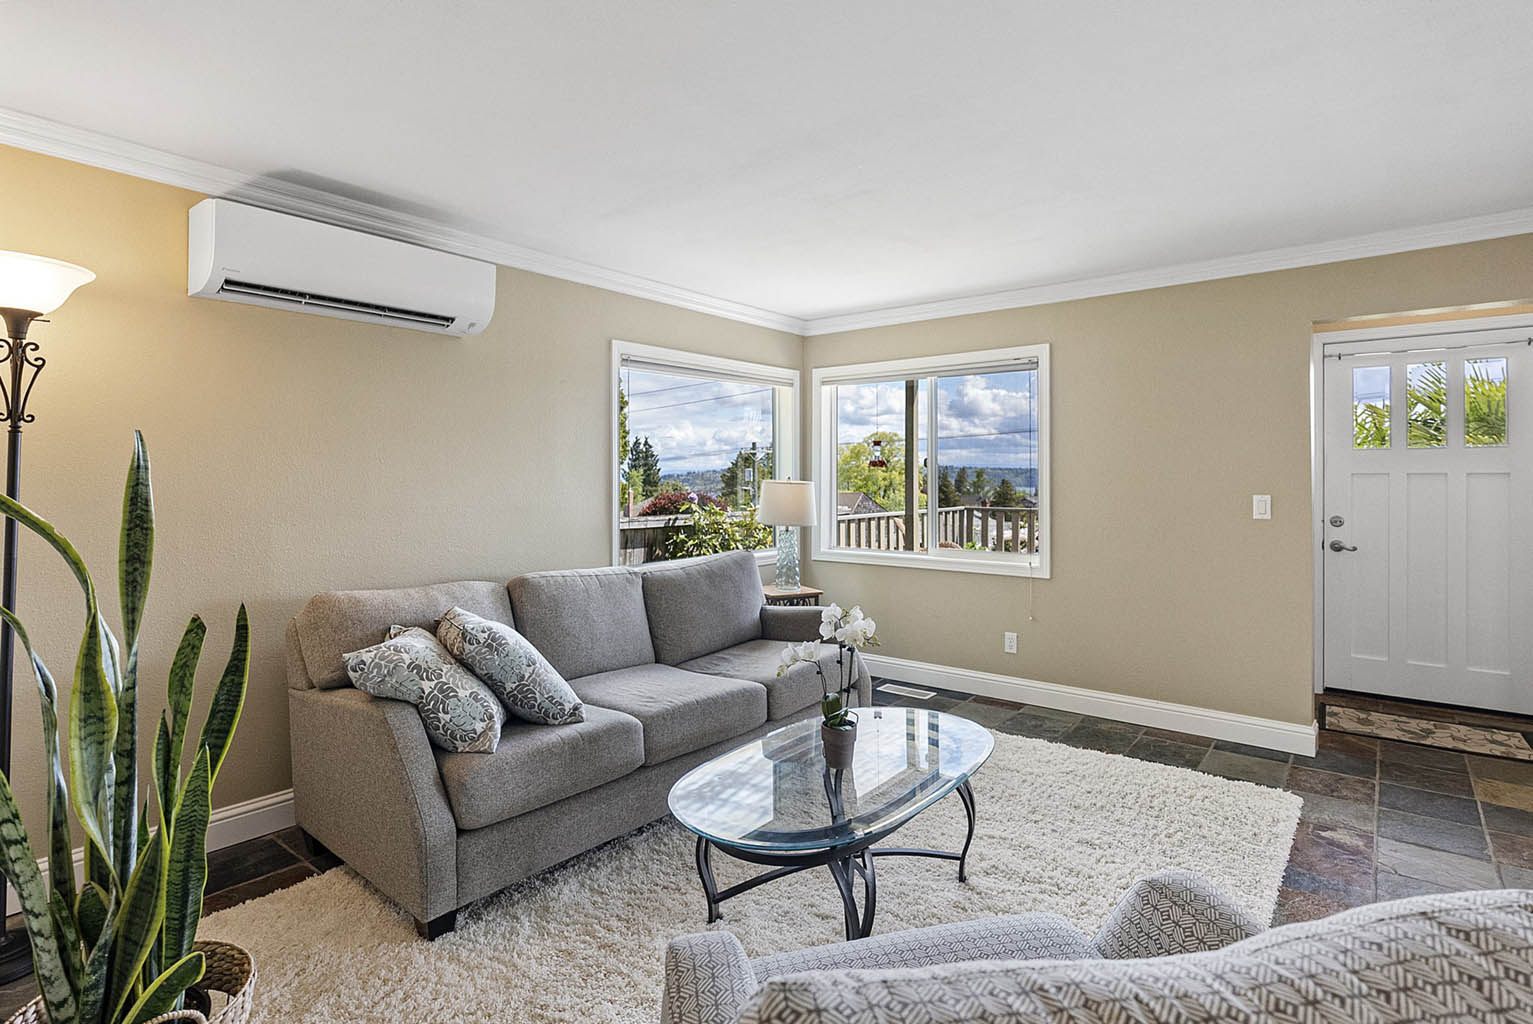 Living area with new ductless heat pump for heating and cooling